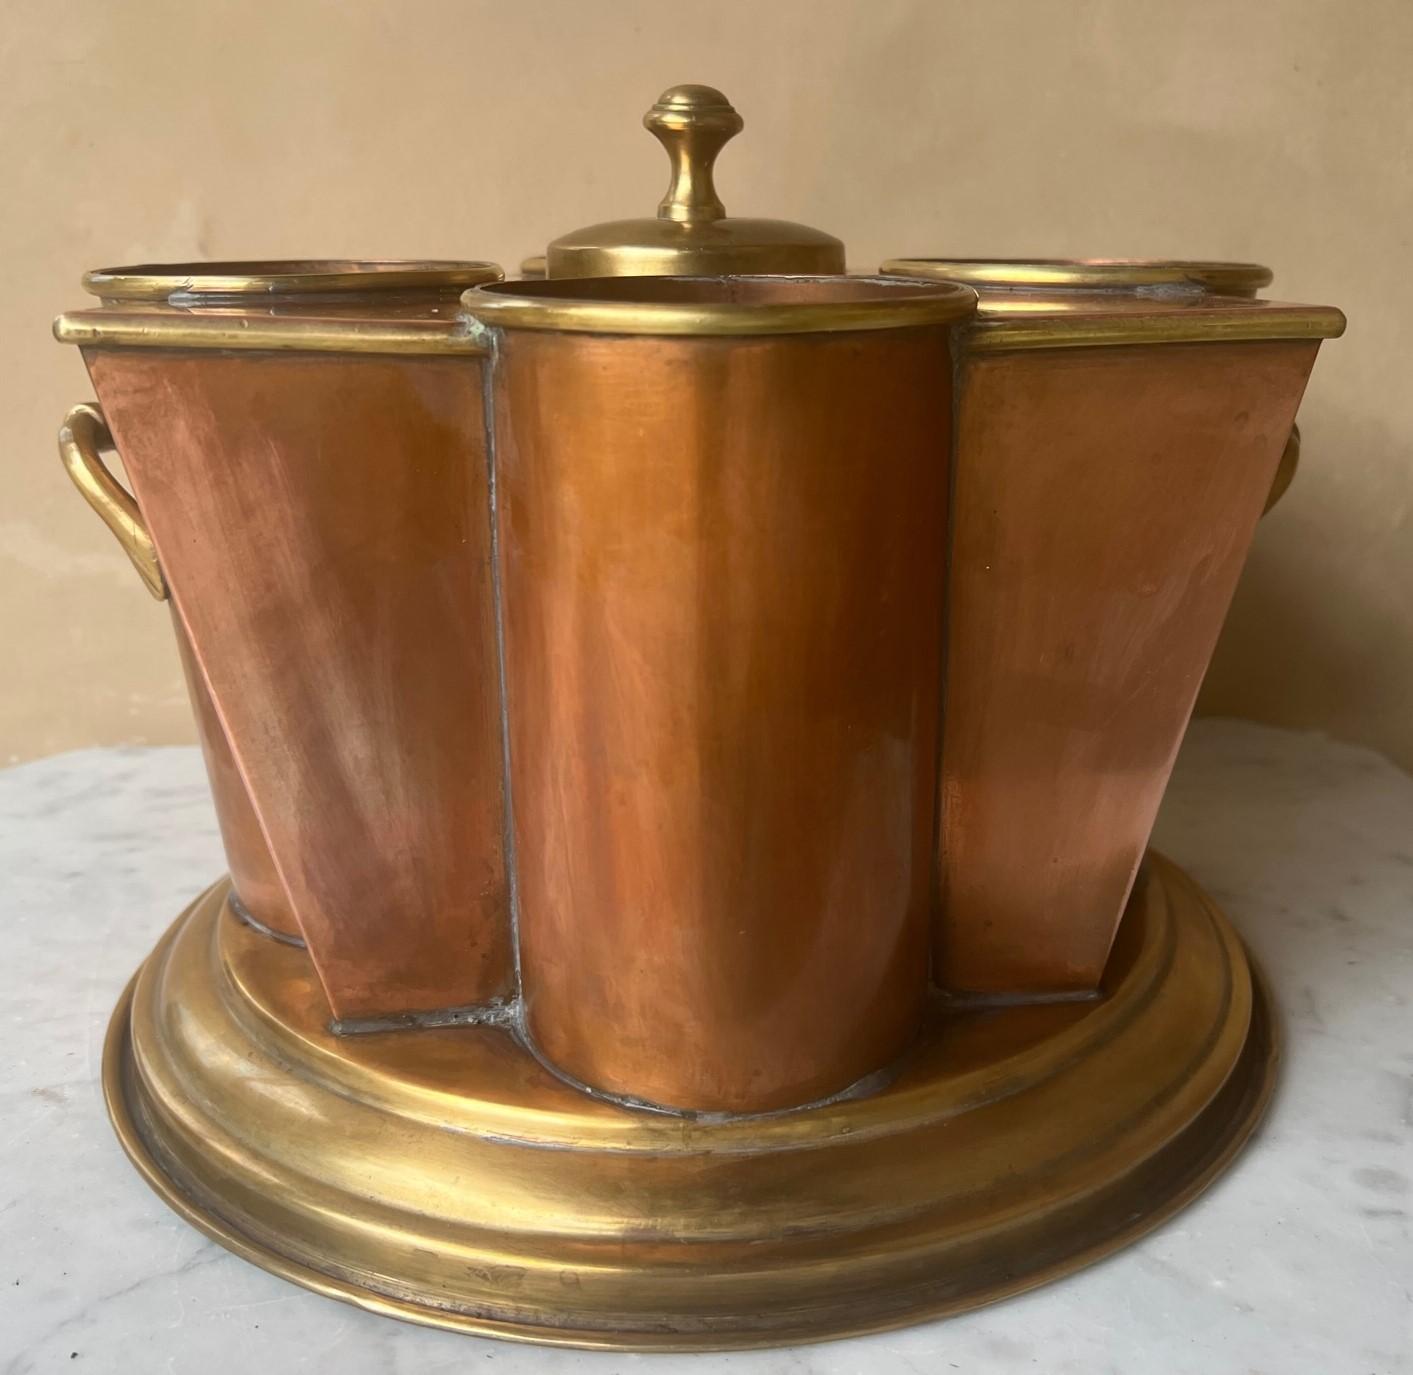 Art Deco style copper & brass wine cooler with 4 areas for individual bottles centering a covered opening to hold ice.